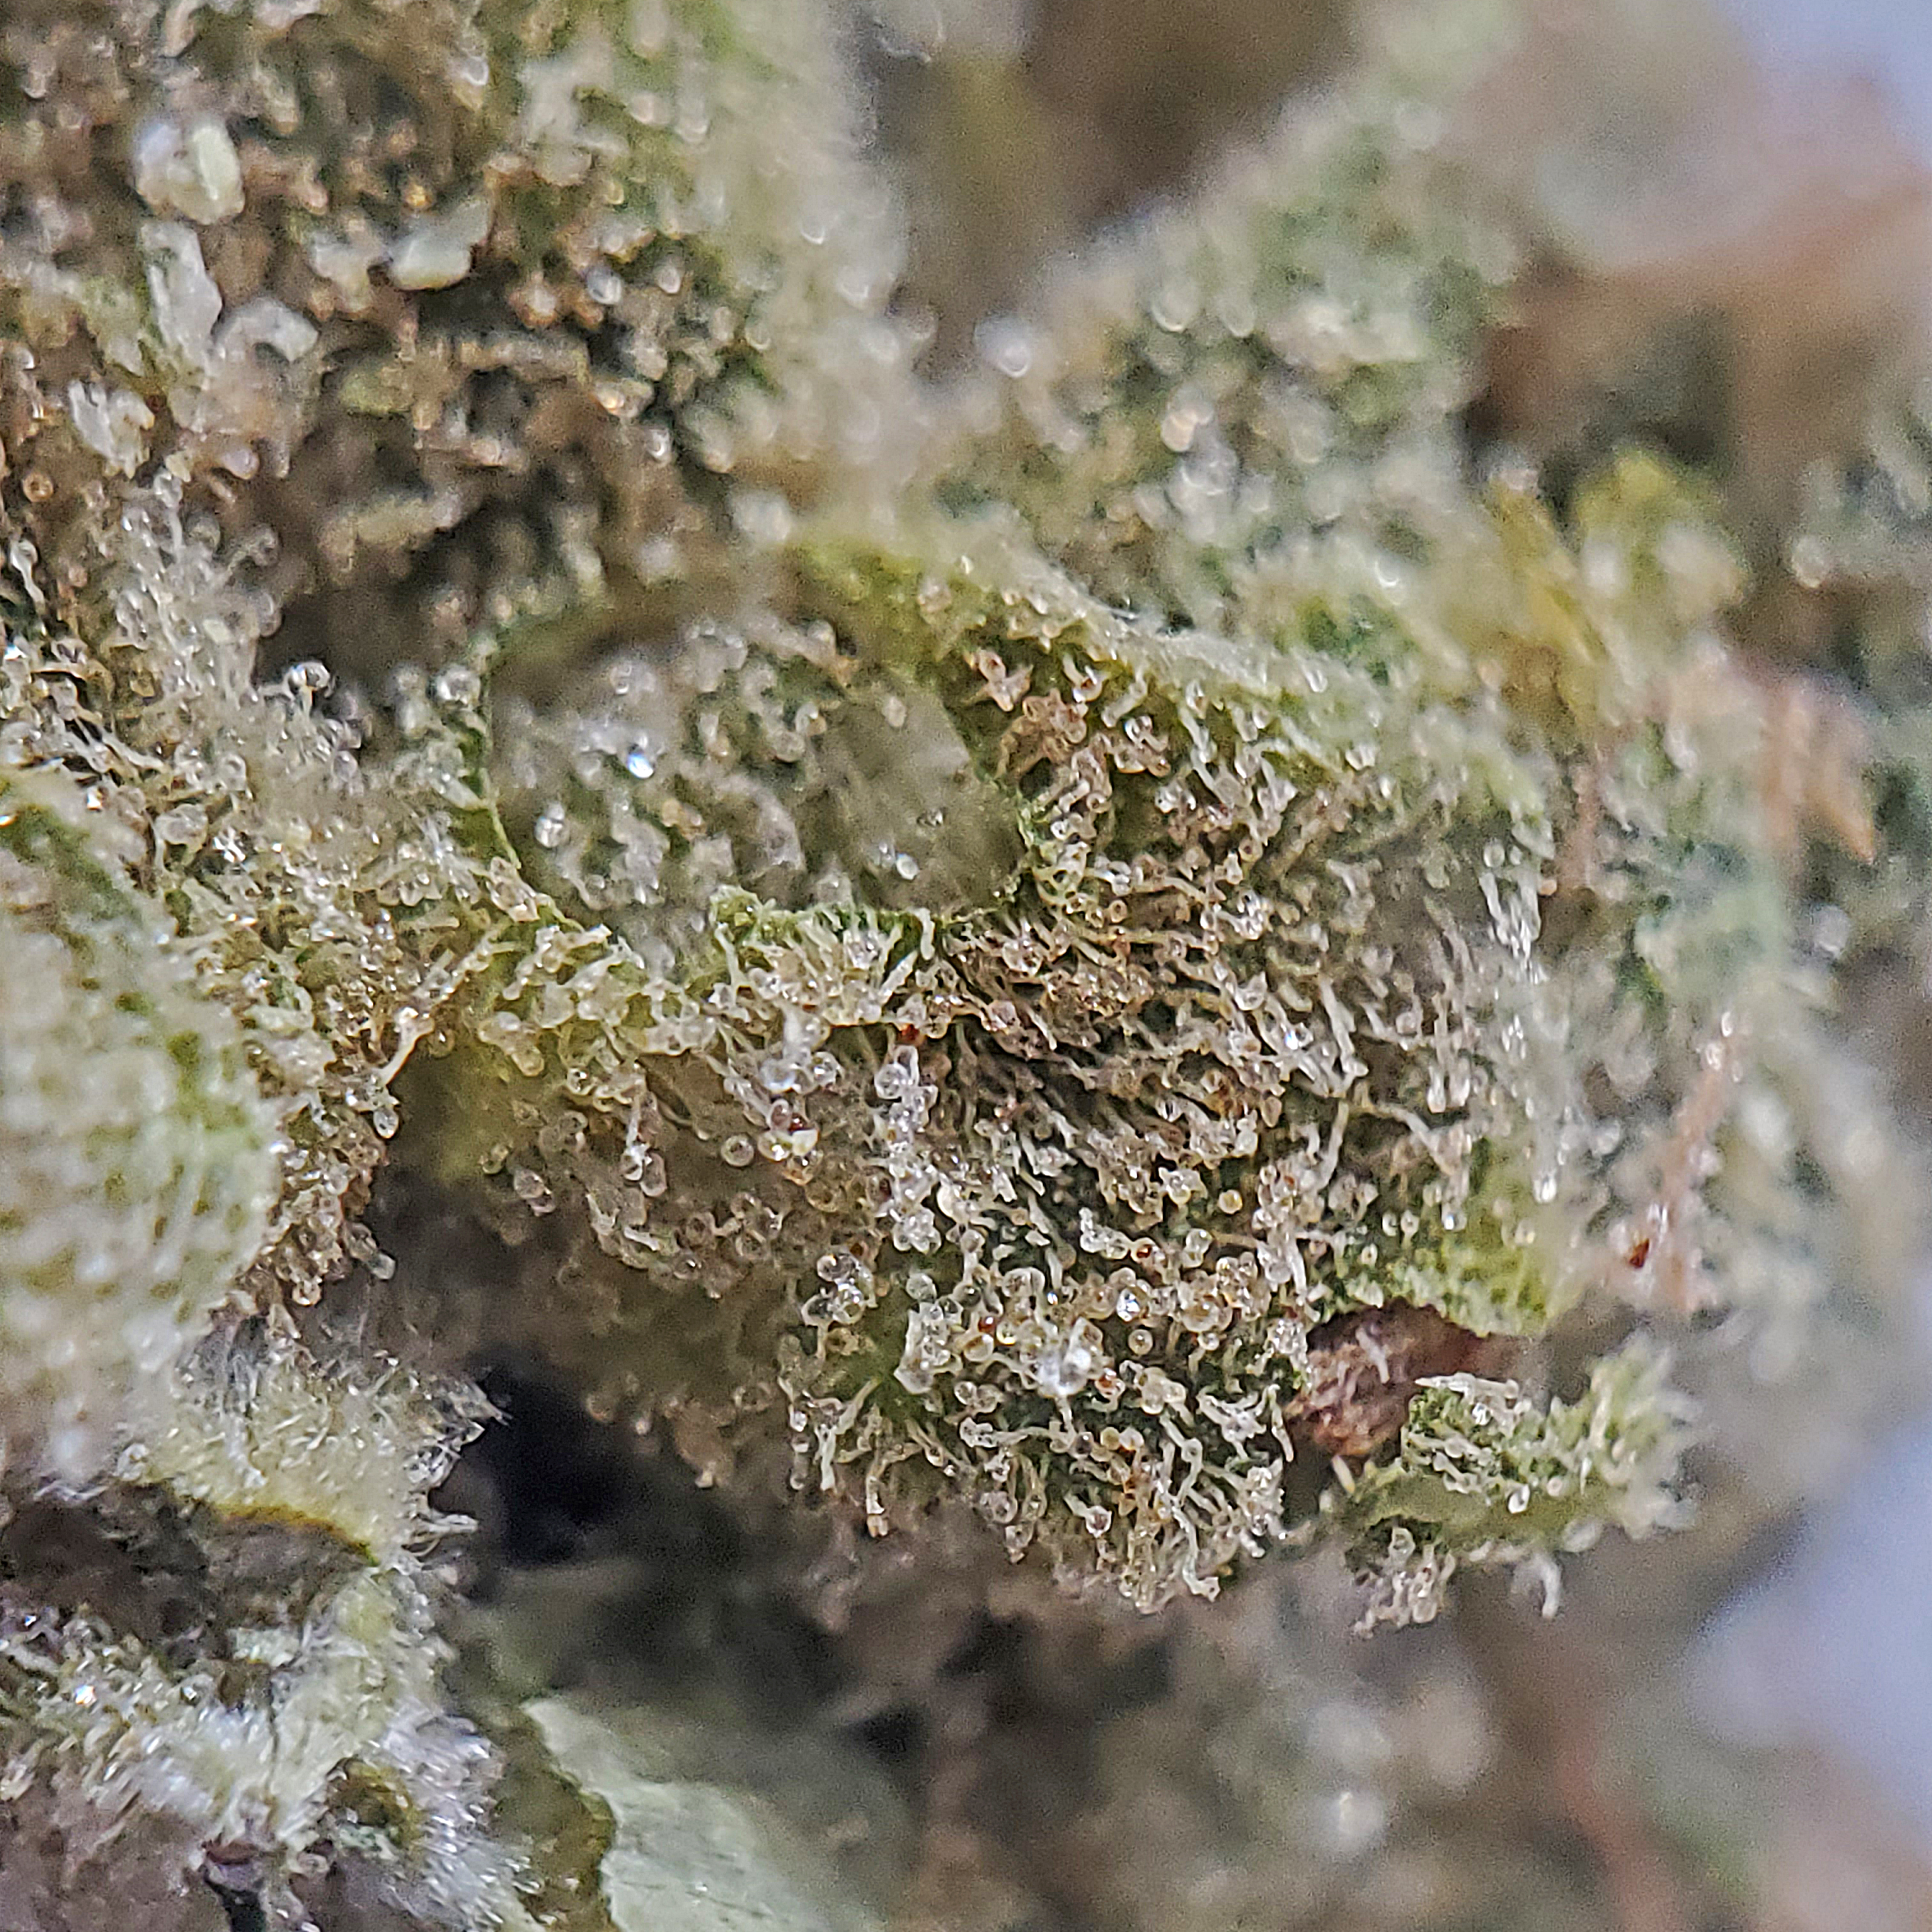 Namaste Canadian Cannabis Licensed Producer Ultra Sour Sativa Weed Strain Review - stashmagazine.ca - Volume 1